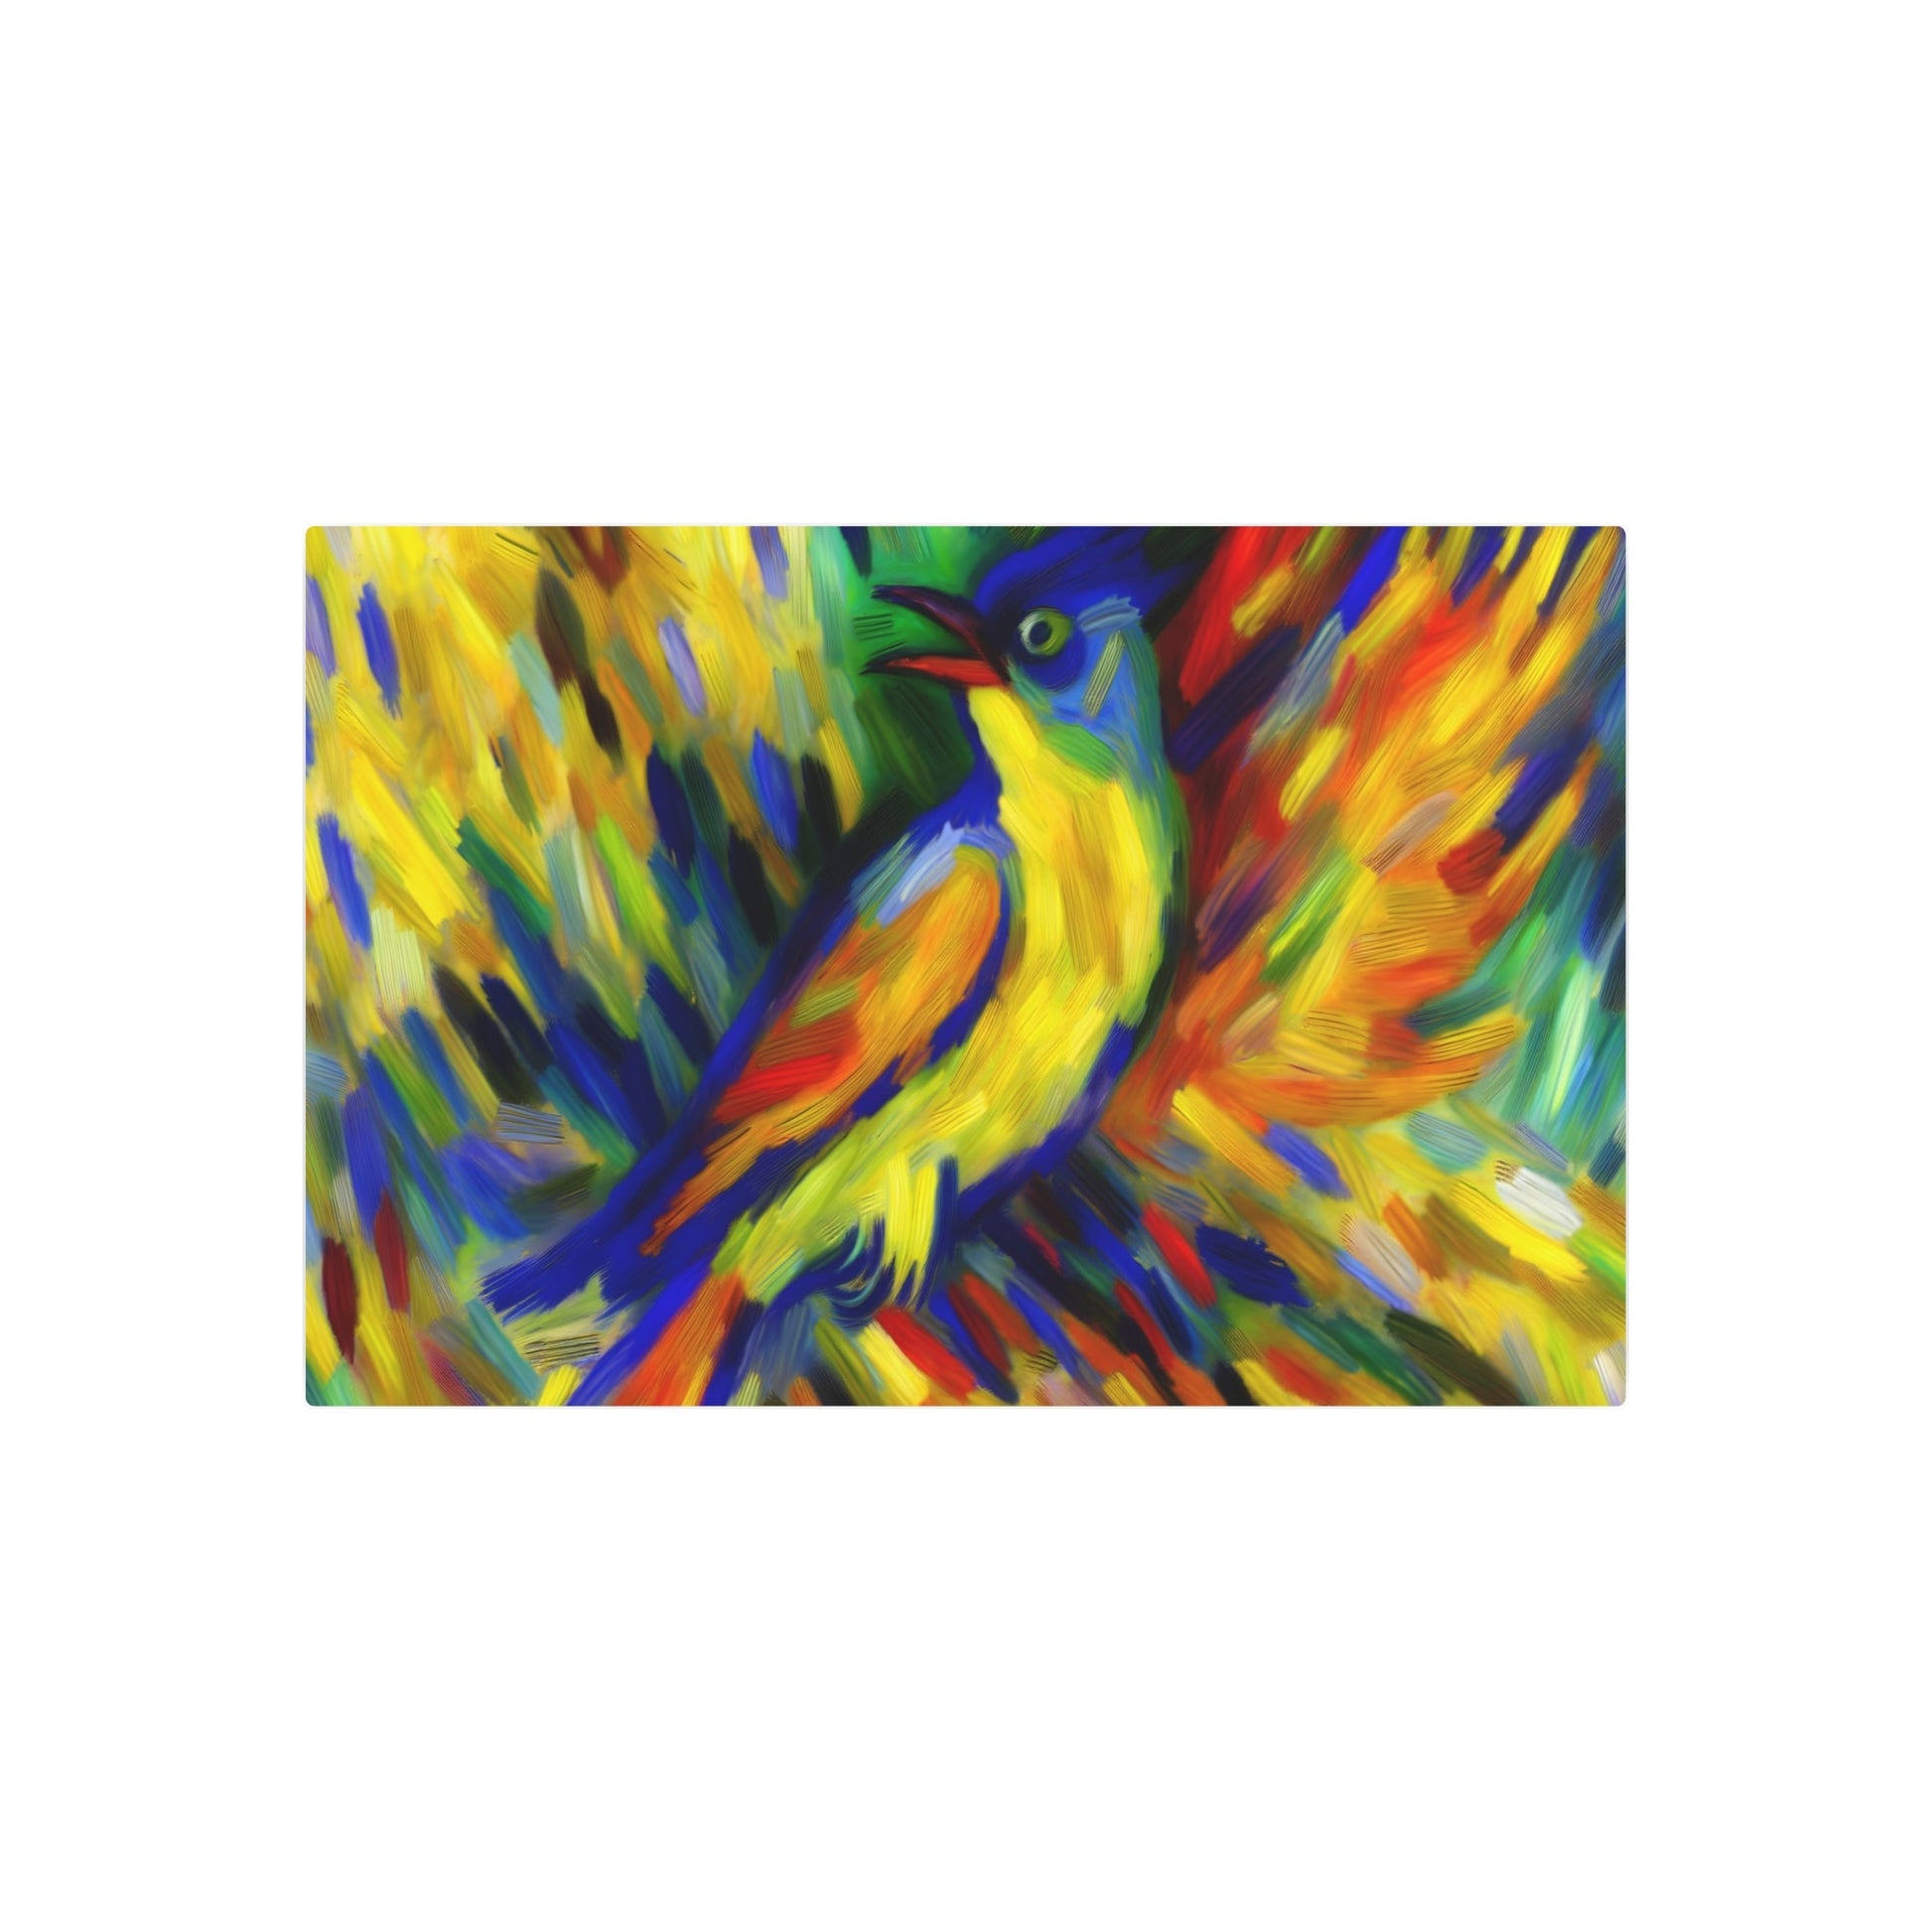 Metal Poster Art | "Expressionism Western Art Style - Vibrant Bird Scene with Intense Colors and Overstated Strokes" - Metal Poster Art 36″ x 24″ (Horizontal) 0.12''